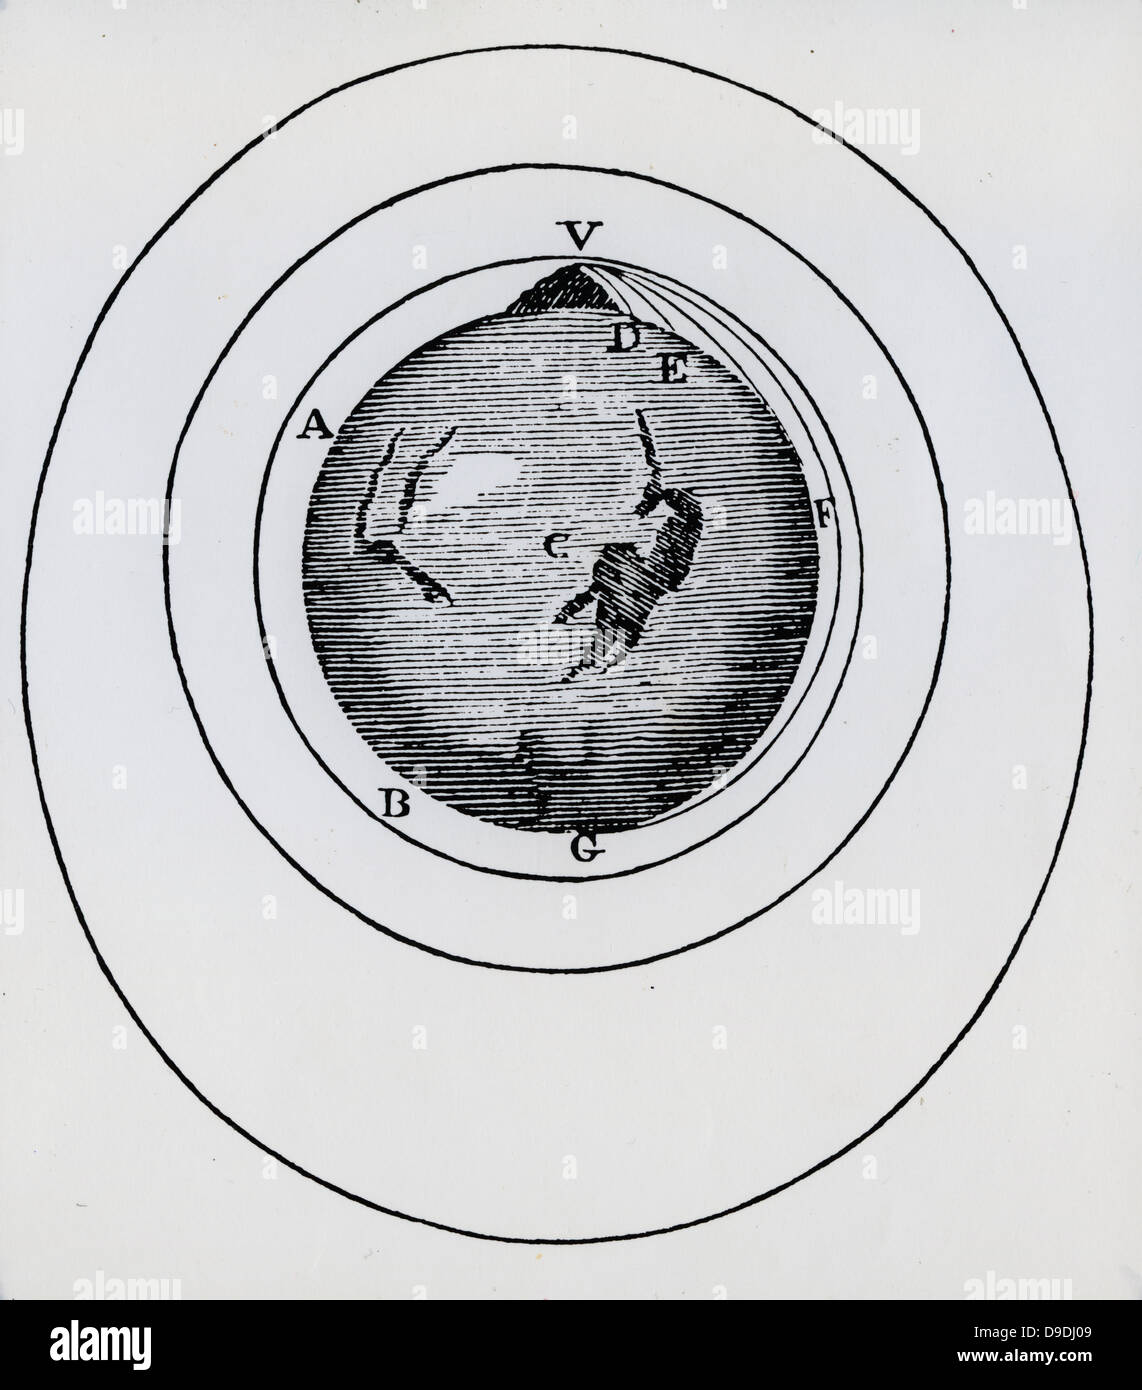 Path of projectile ejected at various velocities until sufficient to put it into orbit. From a English translation of Newton's ''Principia''. Stock Photo